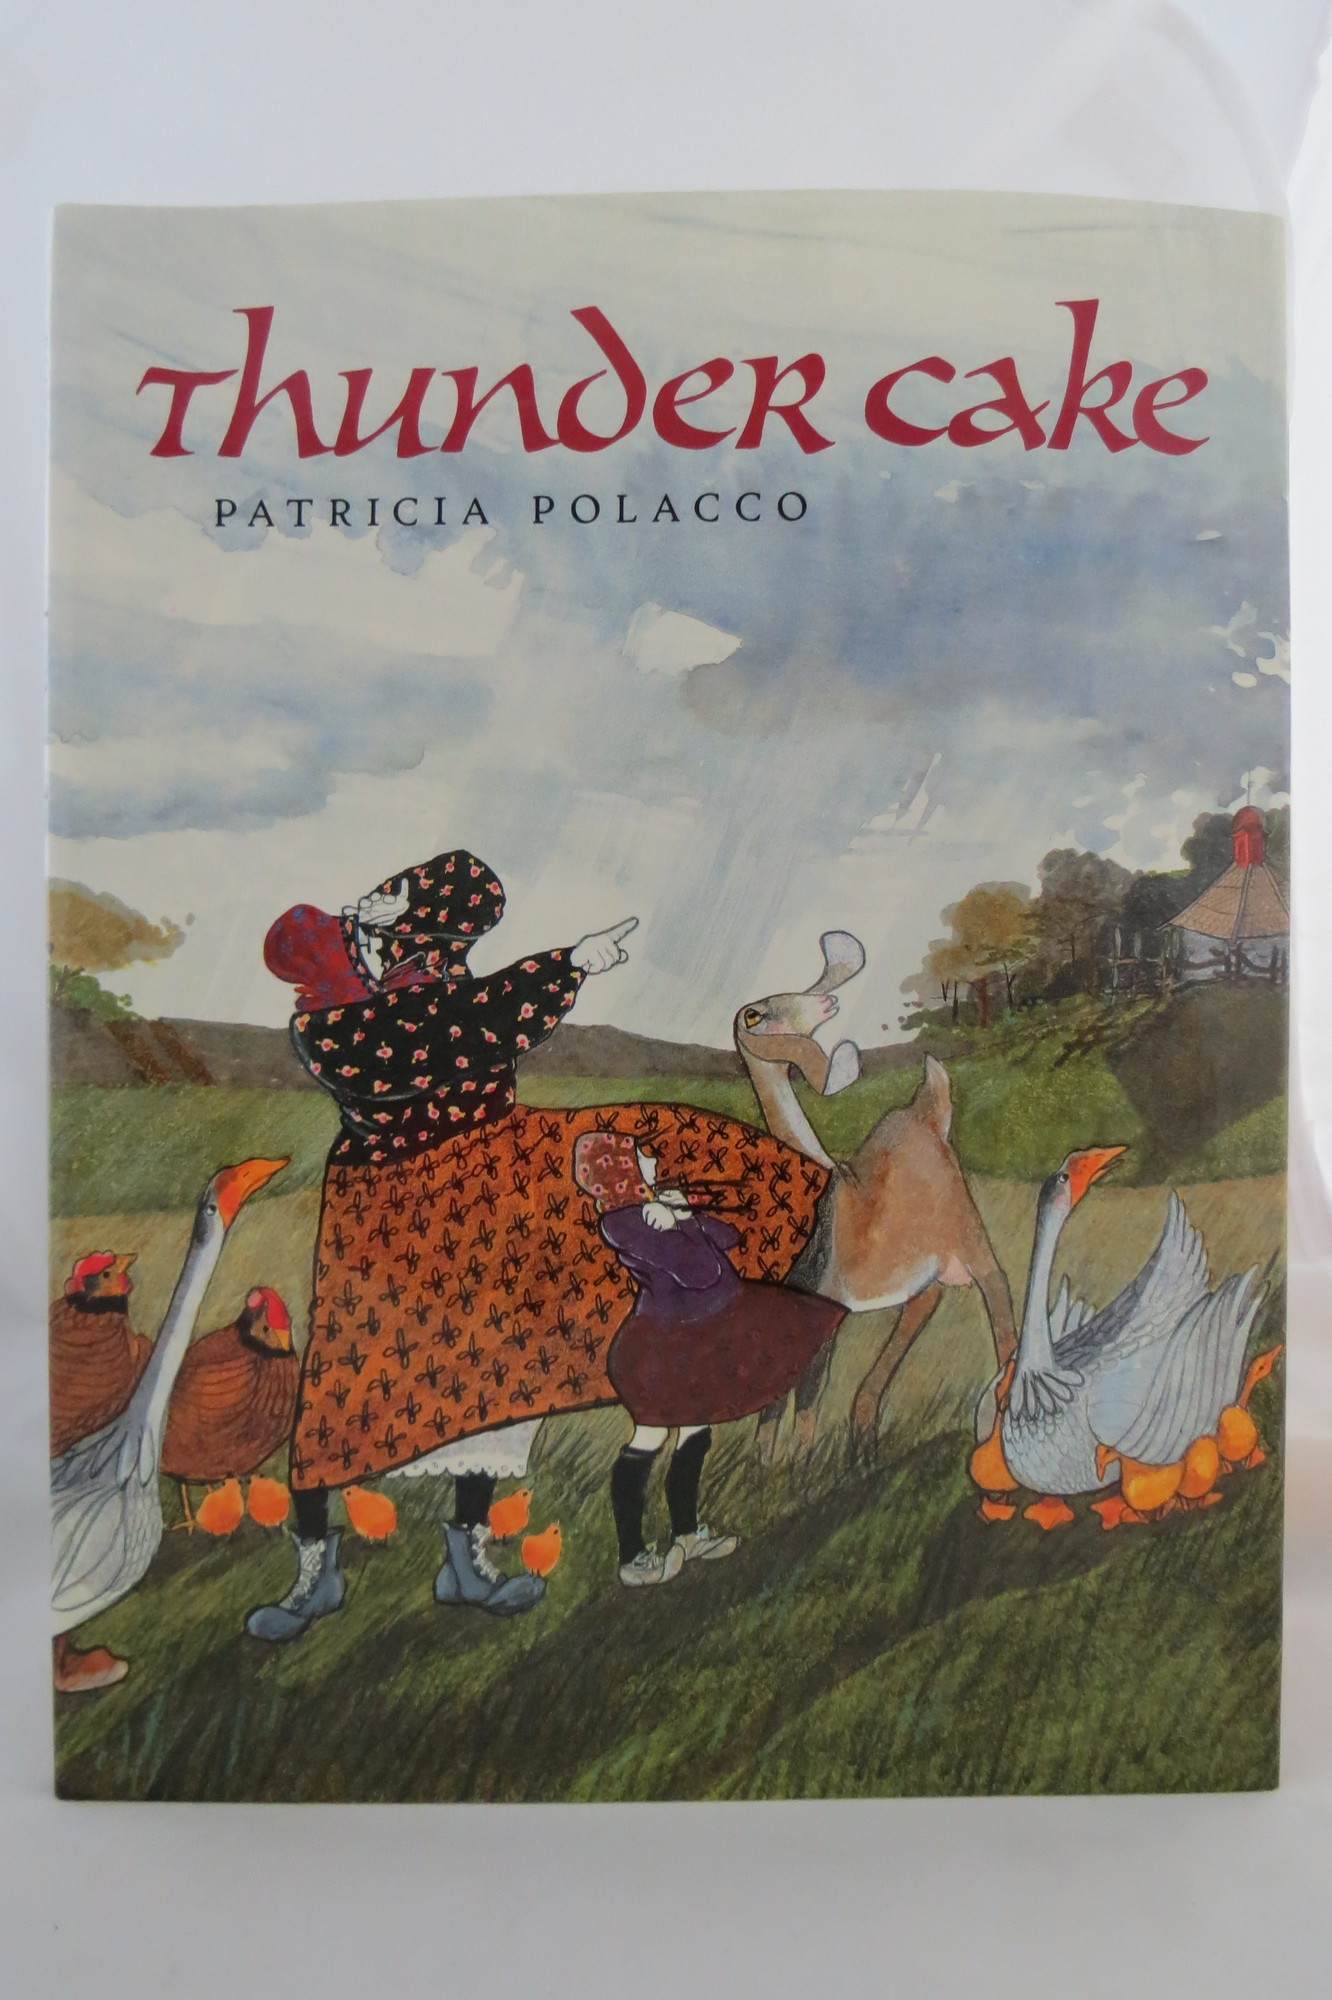 Thunder Cake by Patricia Polacco | Listen along as volunteer Elizabeth  reads the book 